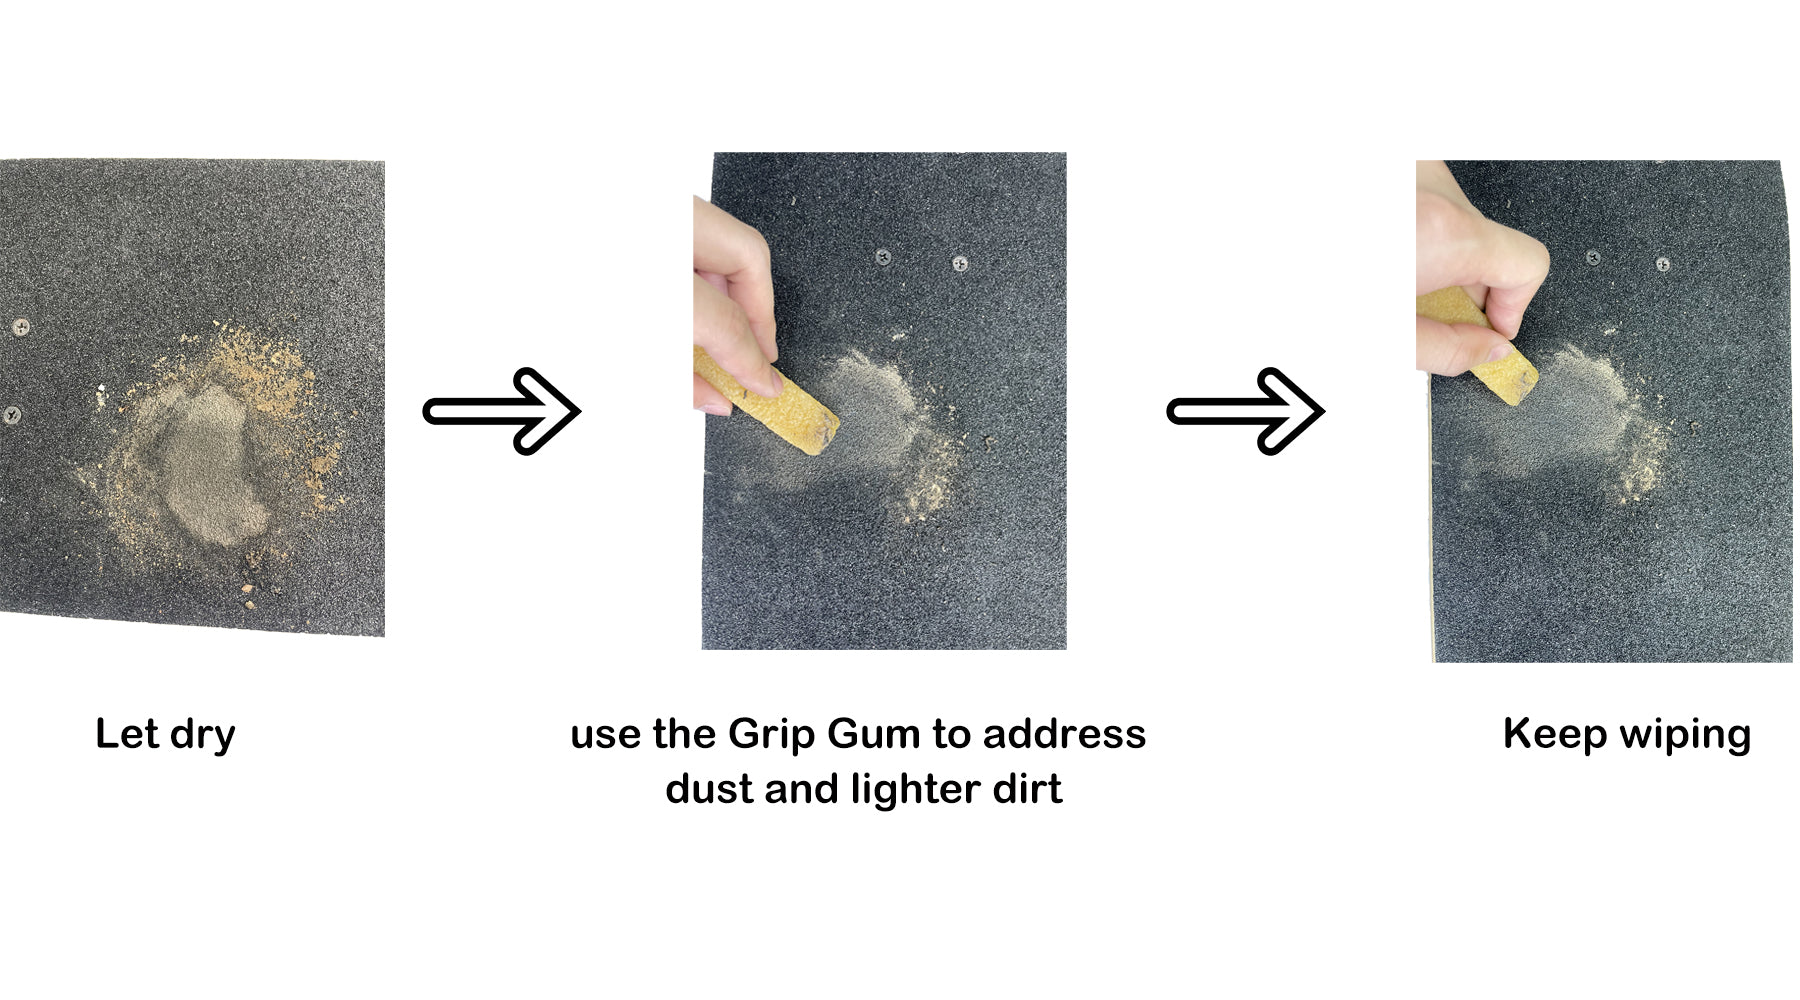 Use-grip-gum-to-clean-light-dirt-on-grip-type